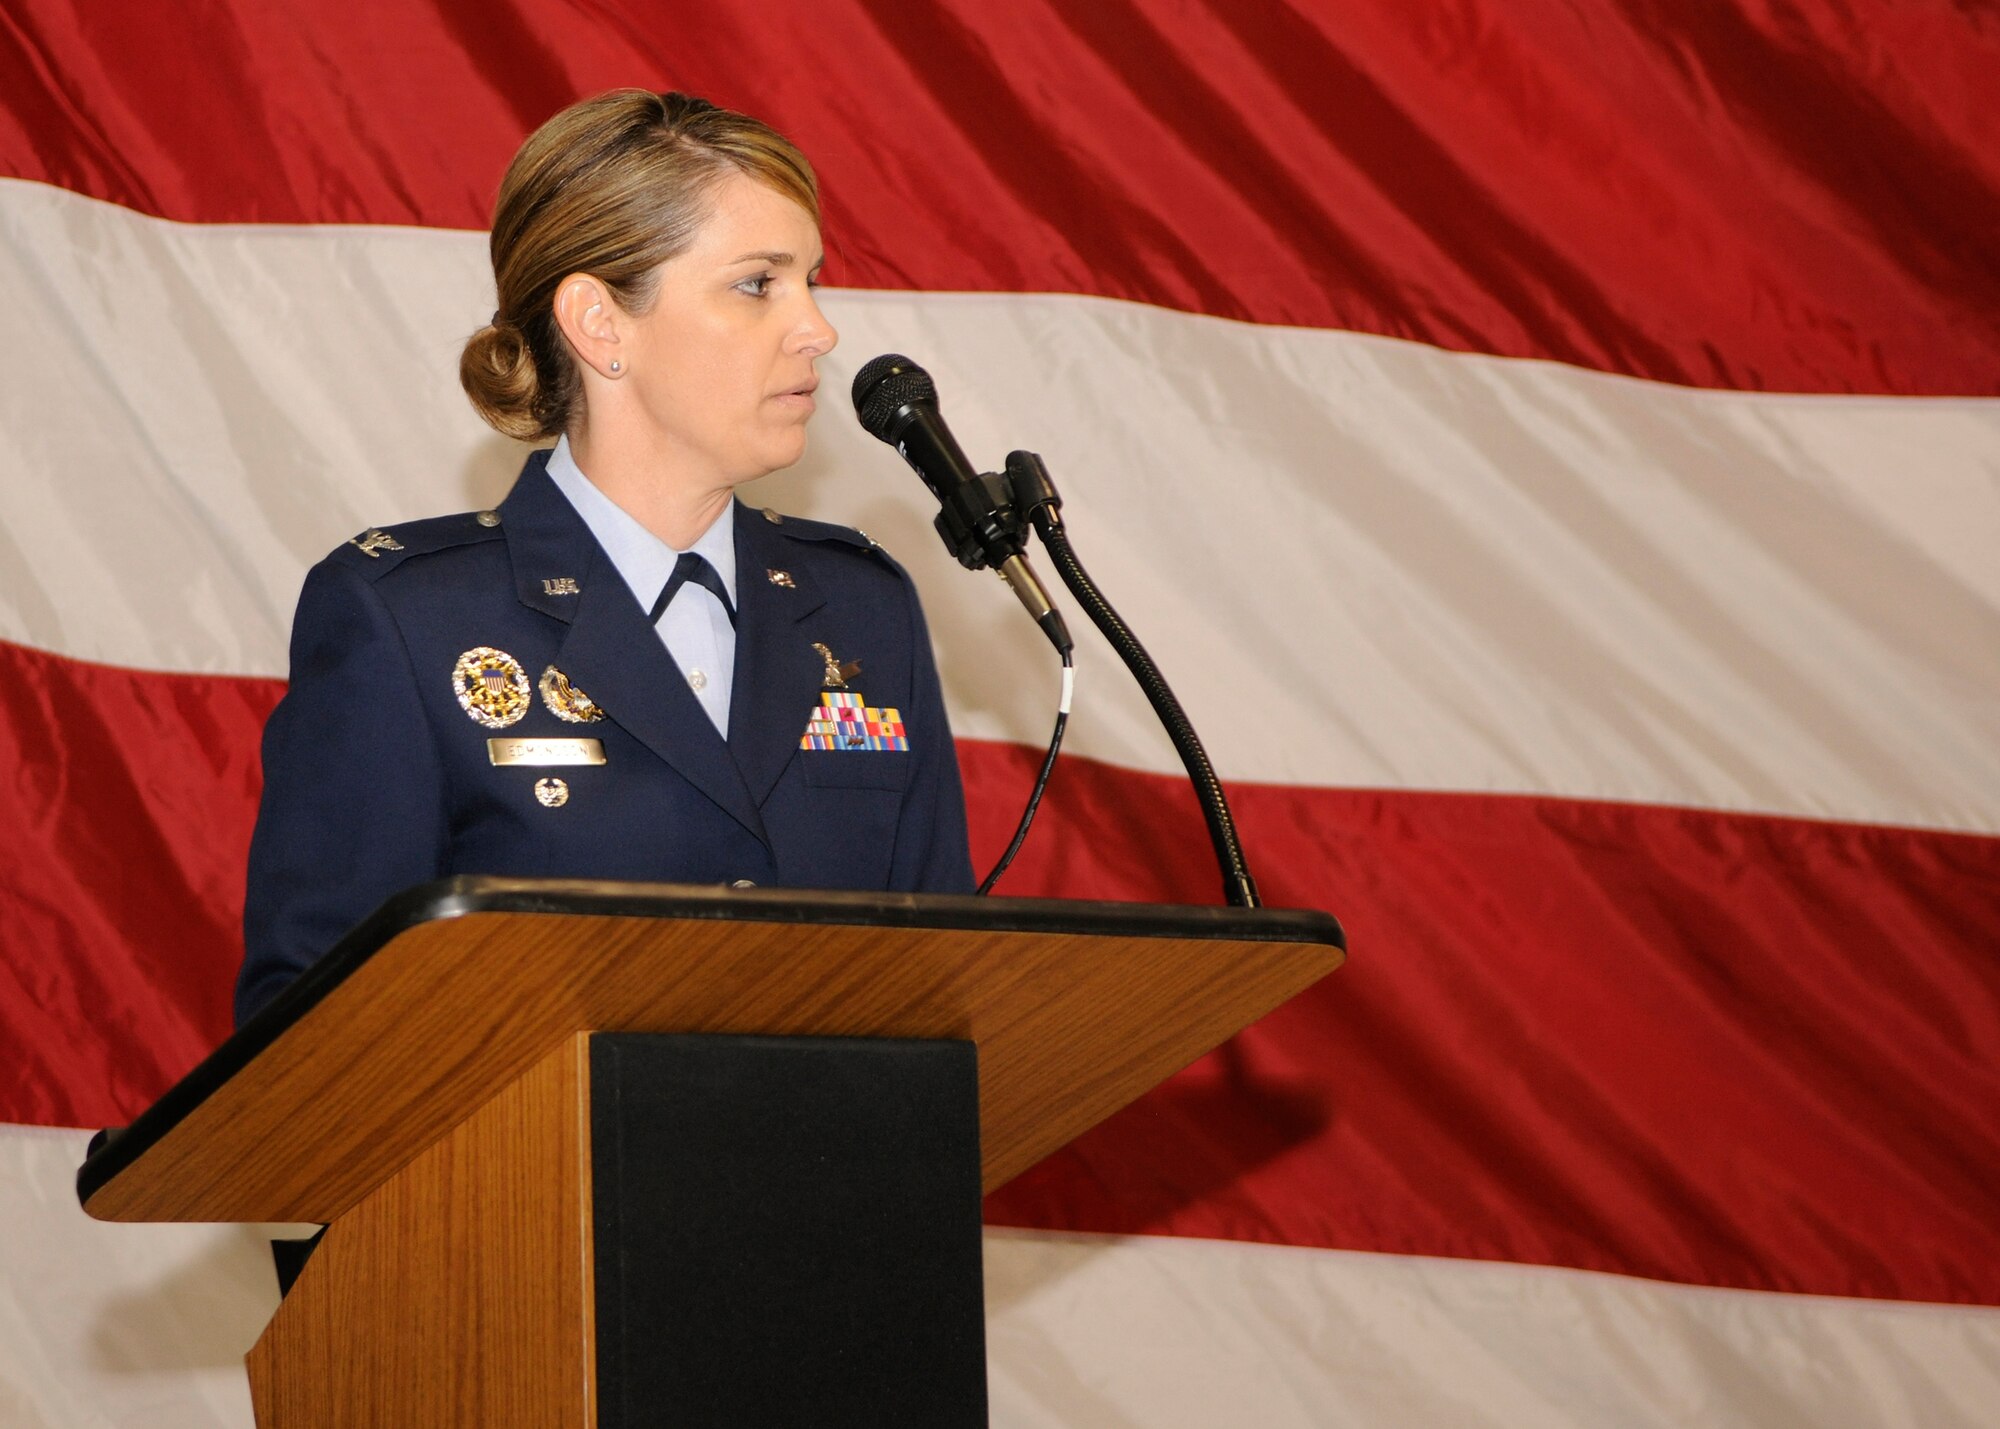 VANDENBERG AIR FORCE BASE, Calif. -- Col. Michele Edmondson, 381st Training Group commander, speaks to unit members and distinguished guests after taking command of the group during a change of command ceremony here June 13, 2012. Edmondson comes to the 381st TRG from a division of the Joint Staff in the Pentagon, where she provided strategic guidance on joint C4 satellite, spectrum, aerial and terrestrial transport systems and programs. (U.S. Air Force photo/Michael Peterson)